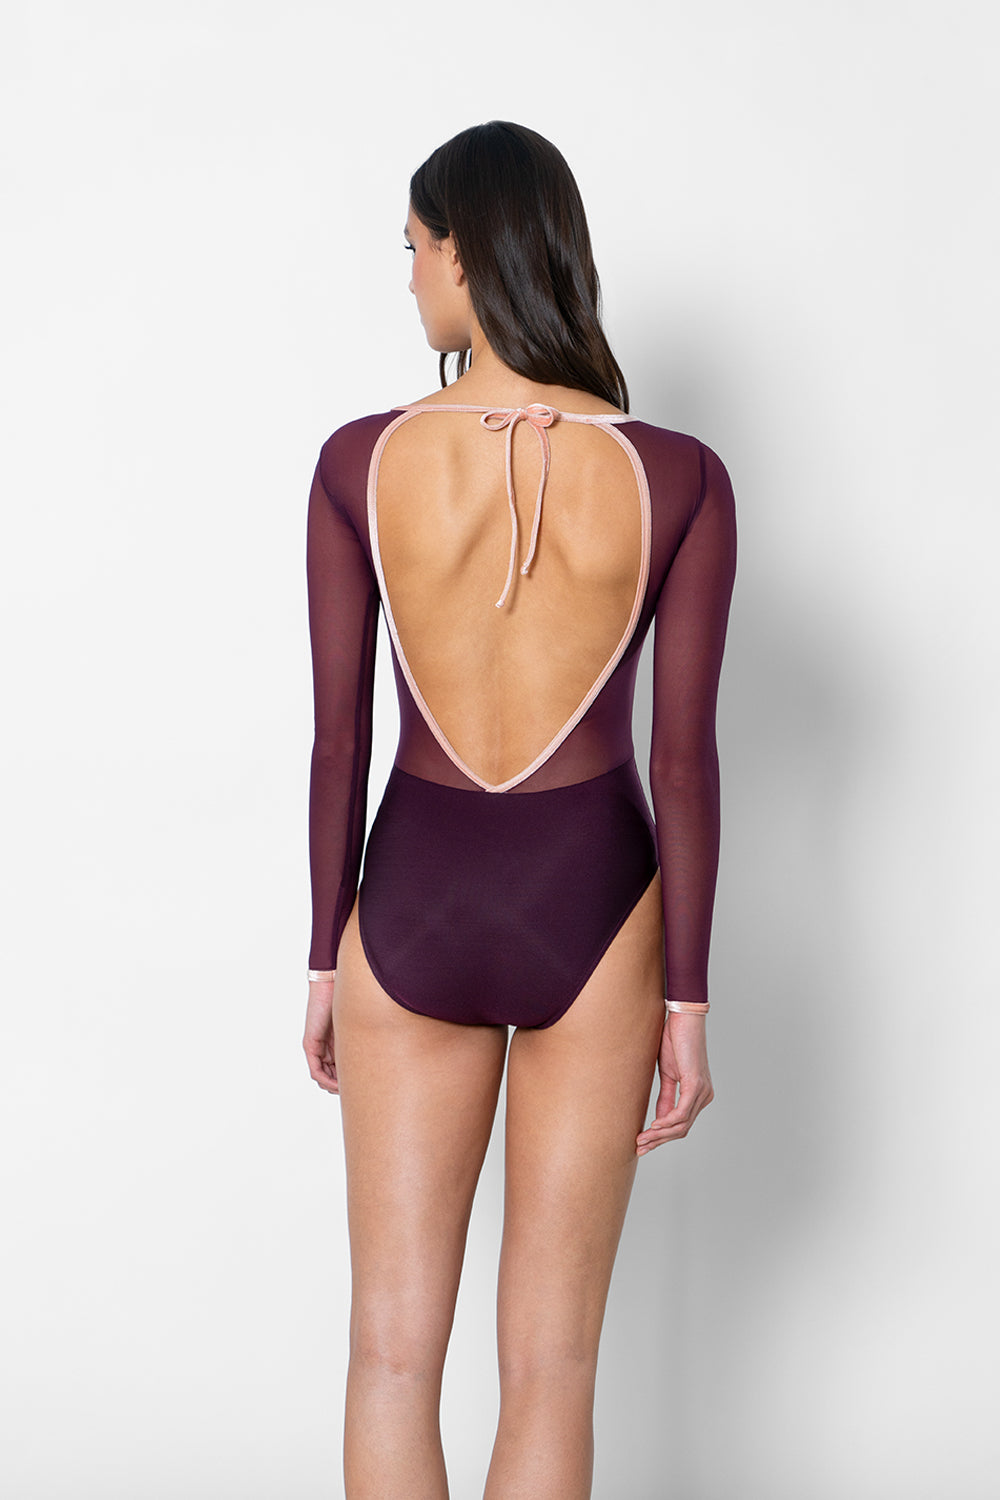 Olivia leotard in N-Opera body color with Mesh Opera top color & long sleeves and V-Blush trim color